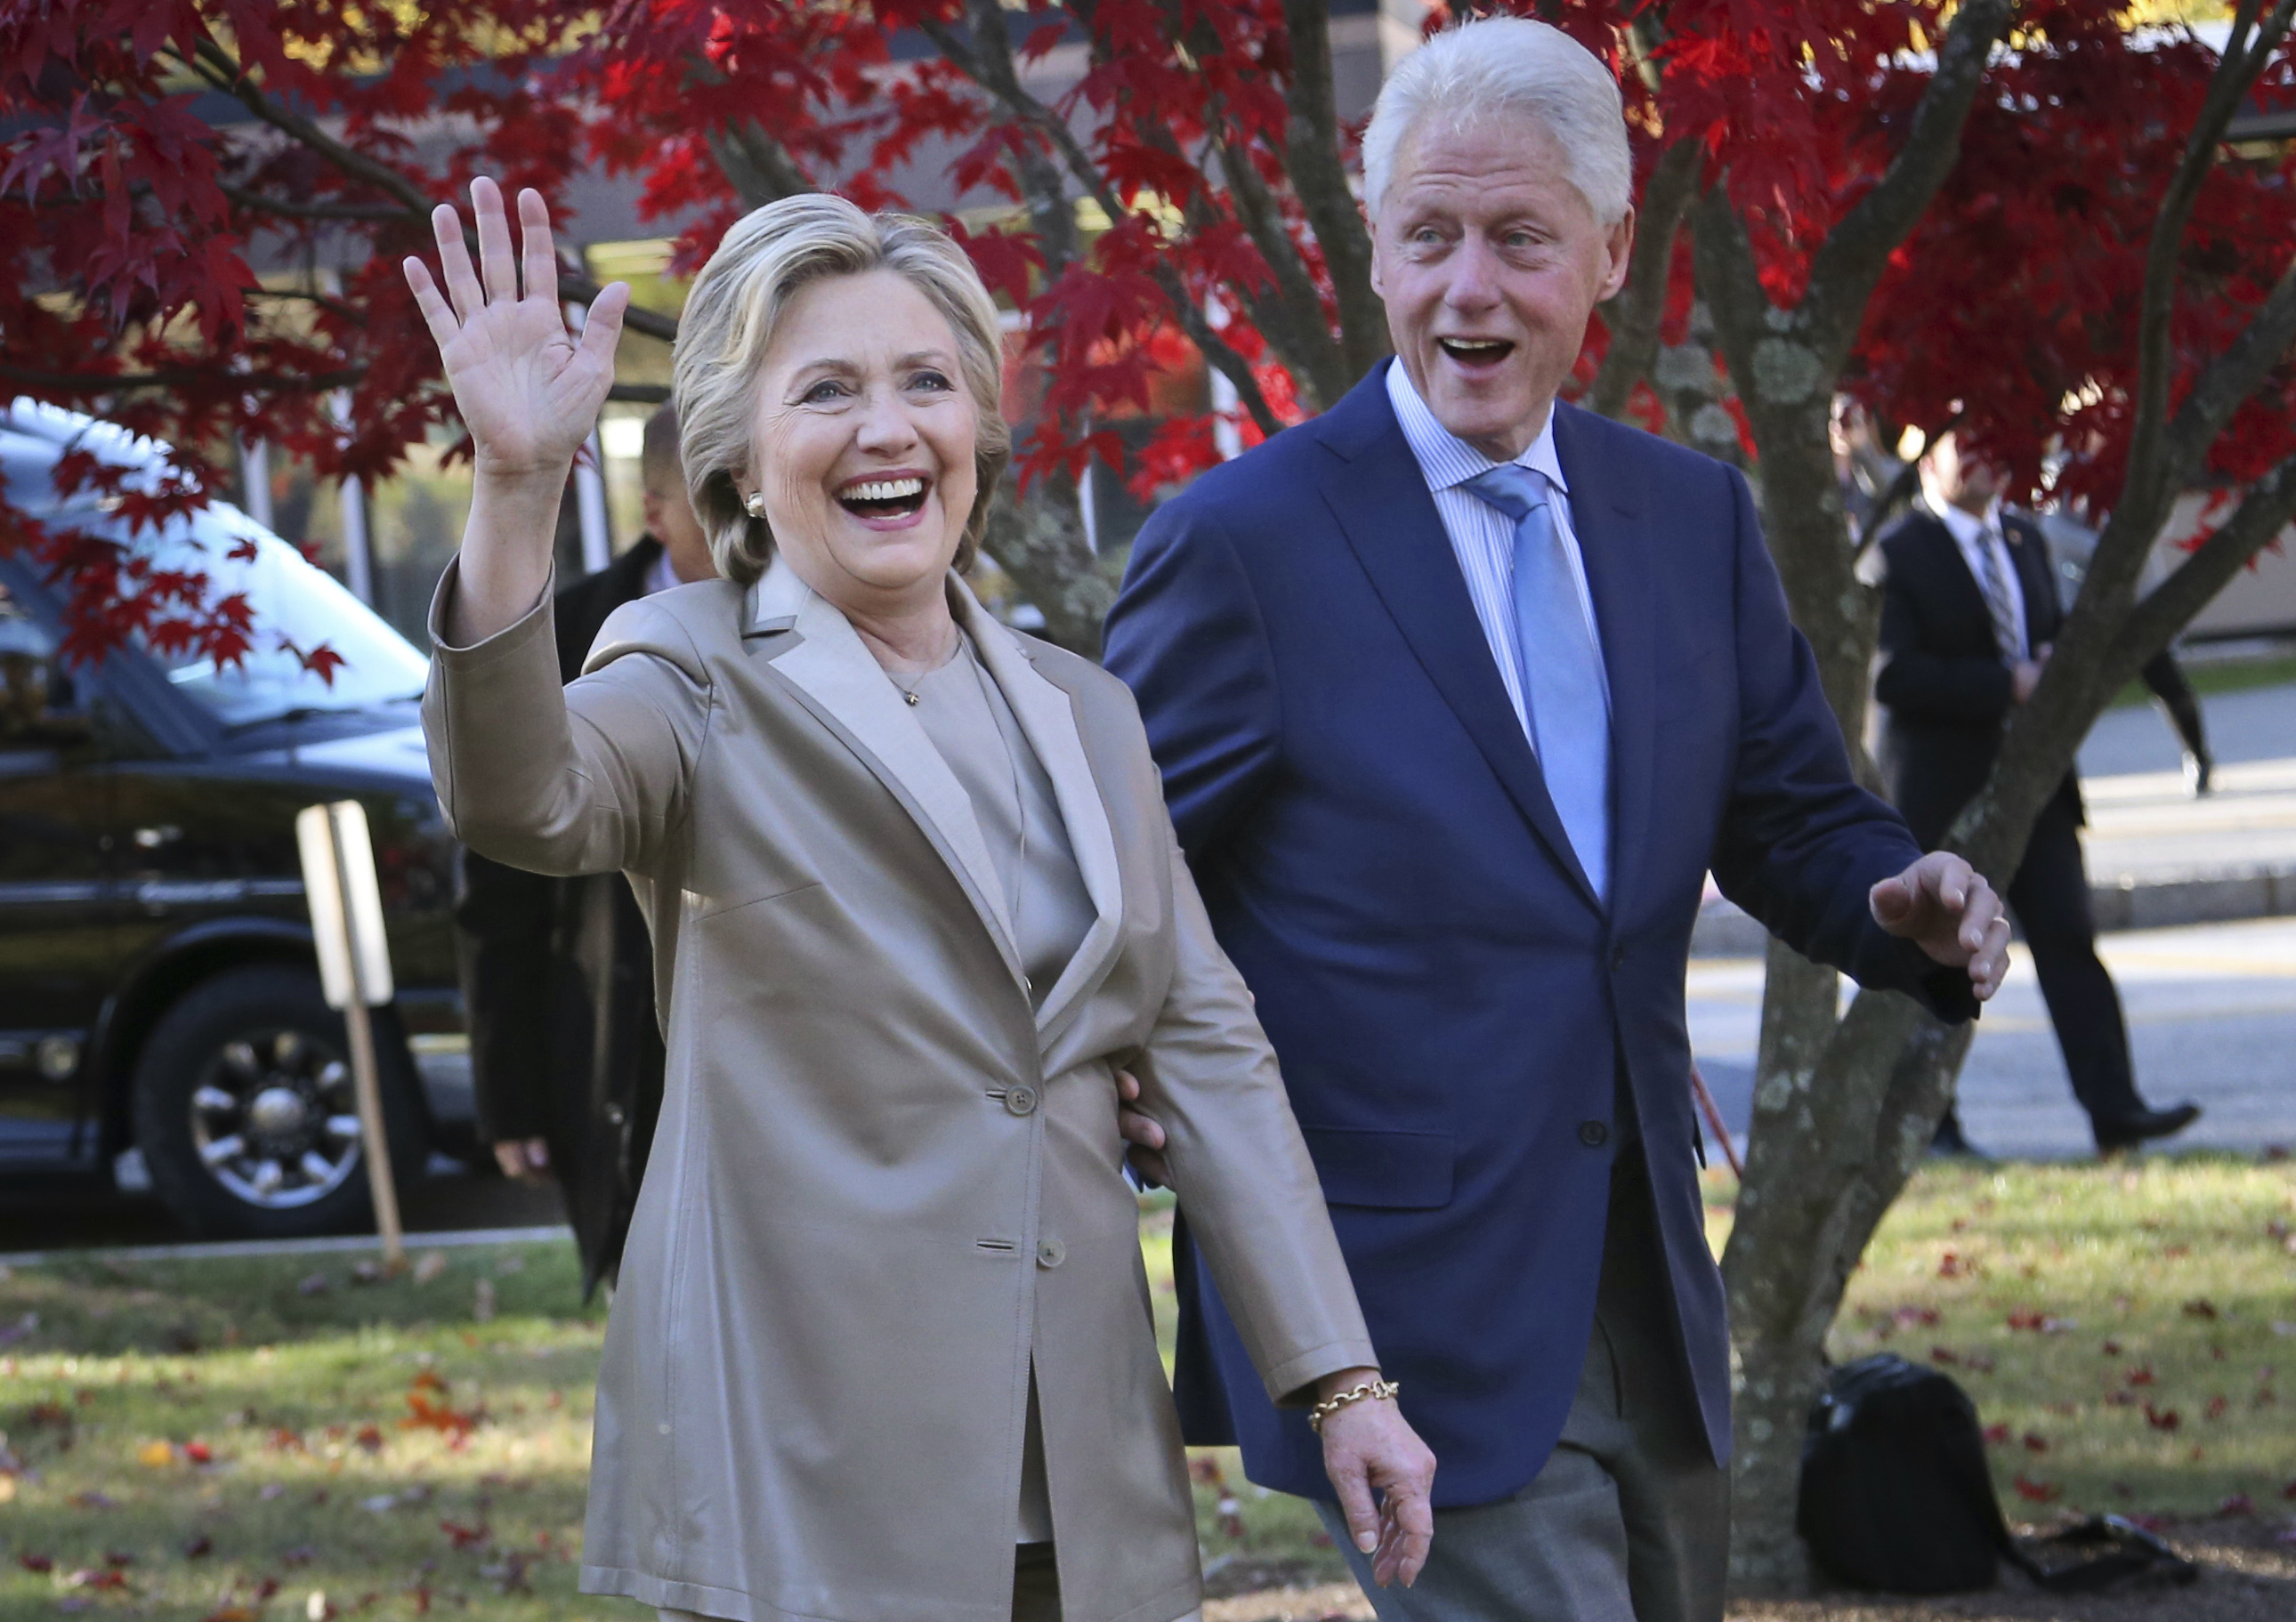 PHOTO: In this Nov. 8, 2016, file photo, Democratic presidential candidate Hillary Clinton, and her husband former President Bill Clinton, greet supporters after voting in Chappaqua, N.Y.